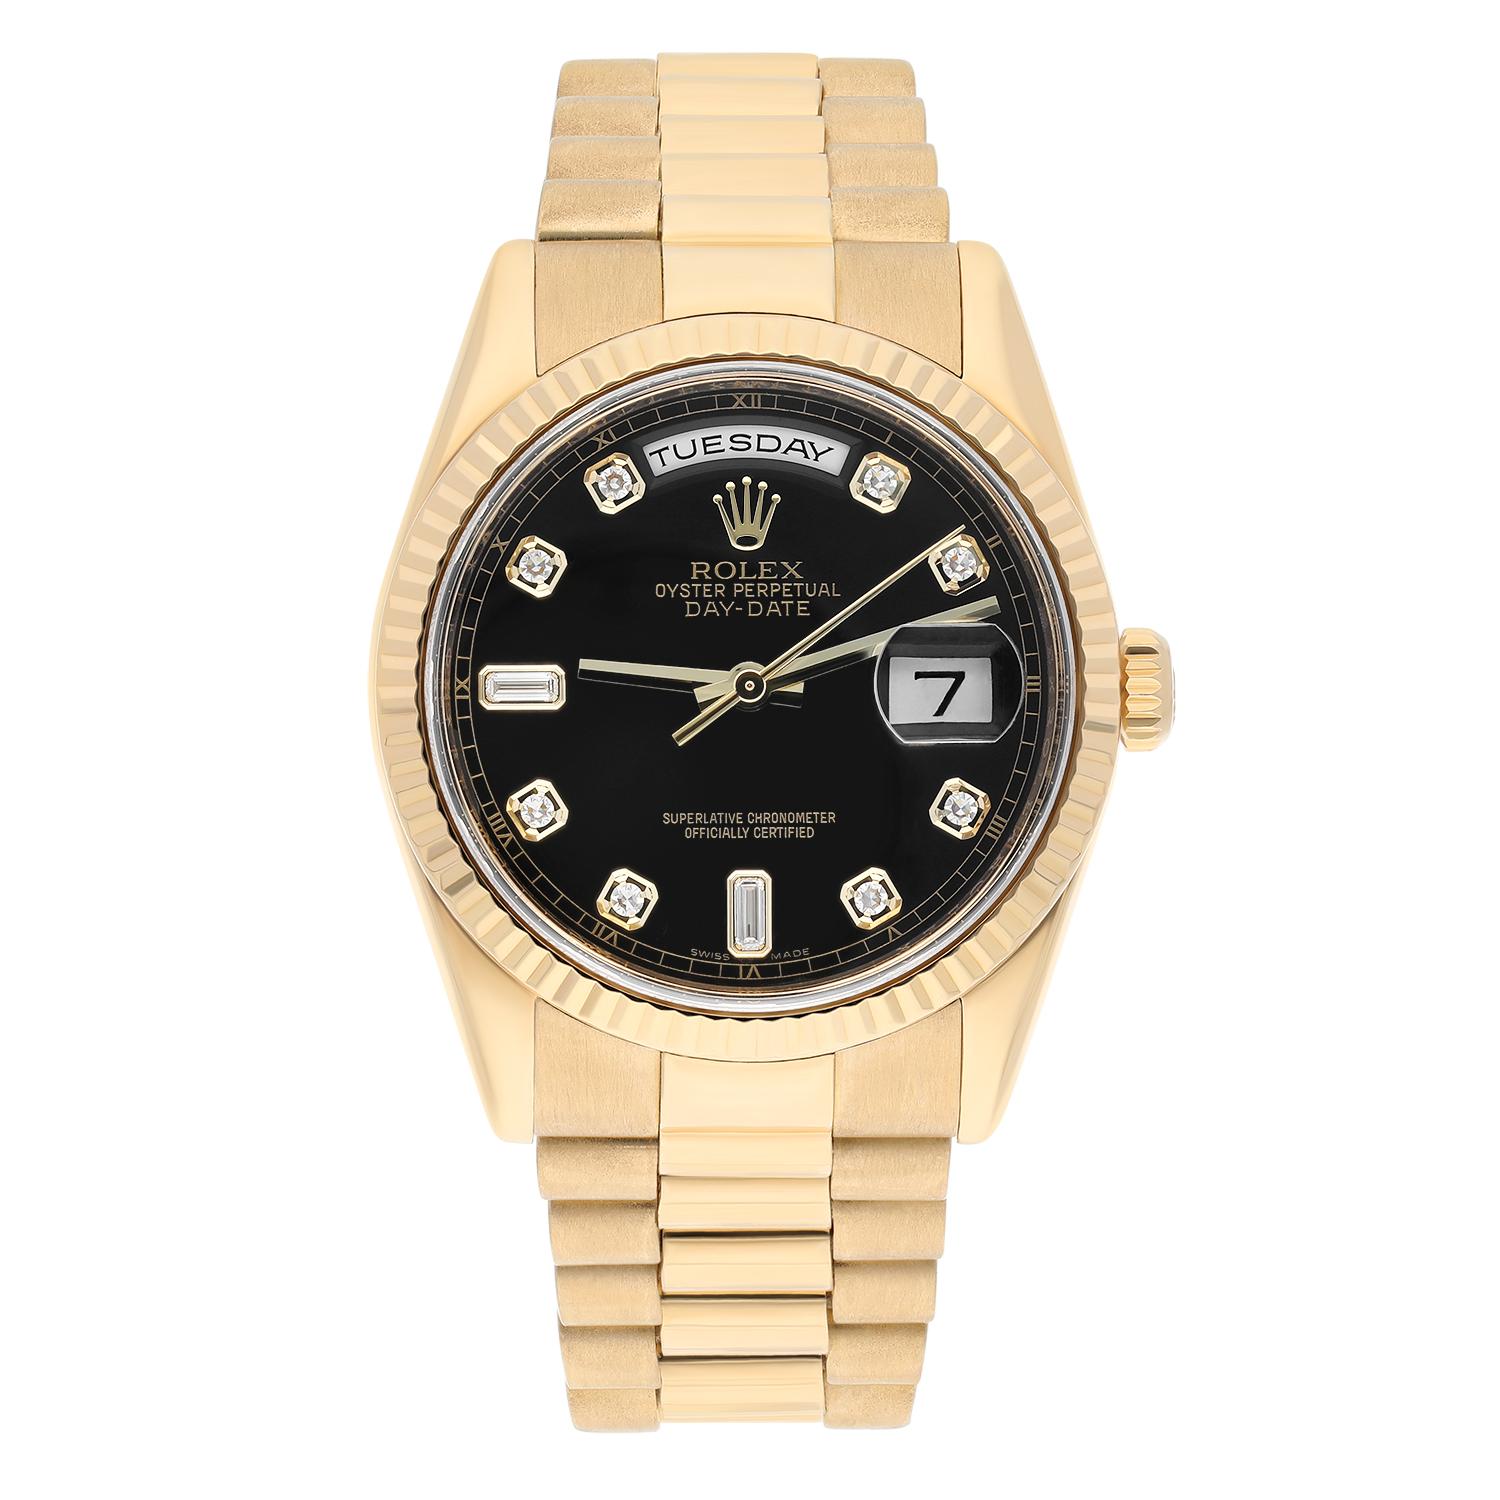 Rolex Day Date 118238 Presidential 36mm 18K Yellow Gold Black Diamond Dial

This watch has been professionally polished, serviced and does not have any visible scratches or blemishes. It is a genuine Rolex which has been inspected to verify